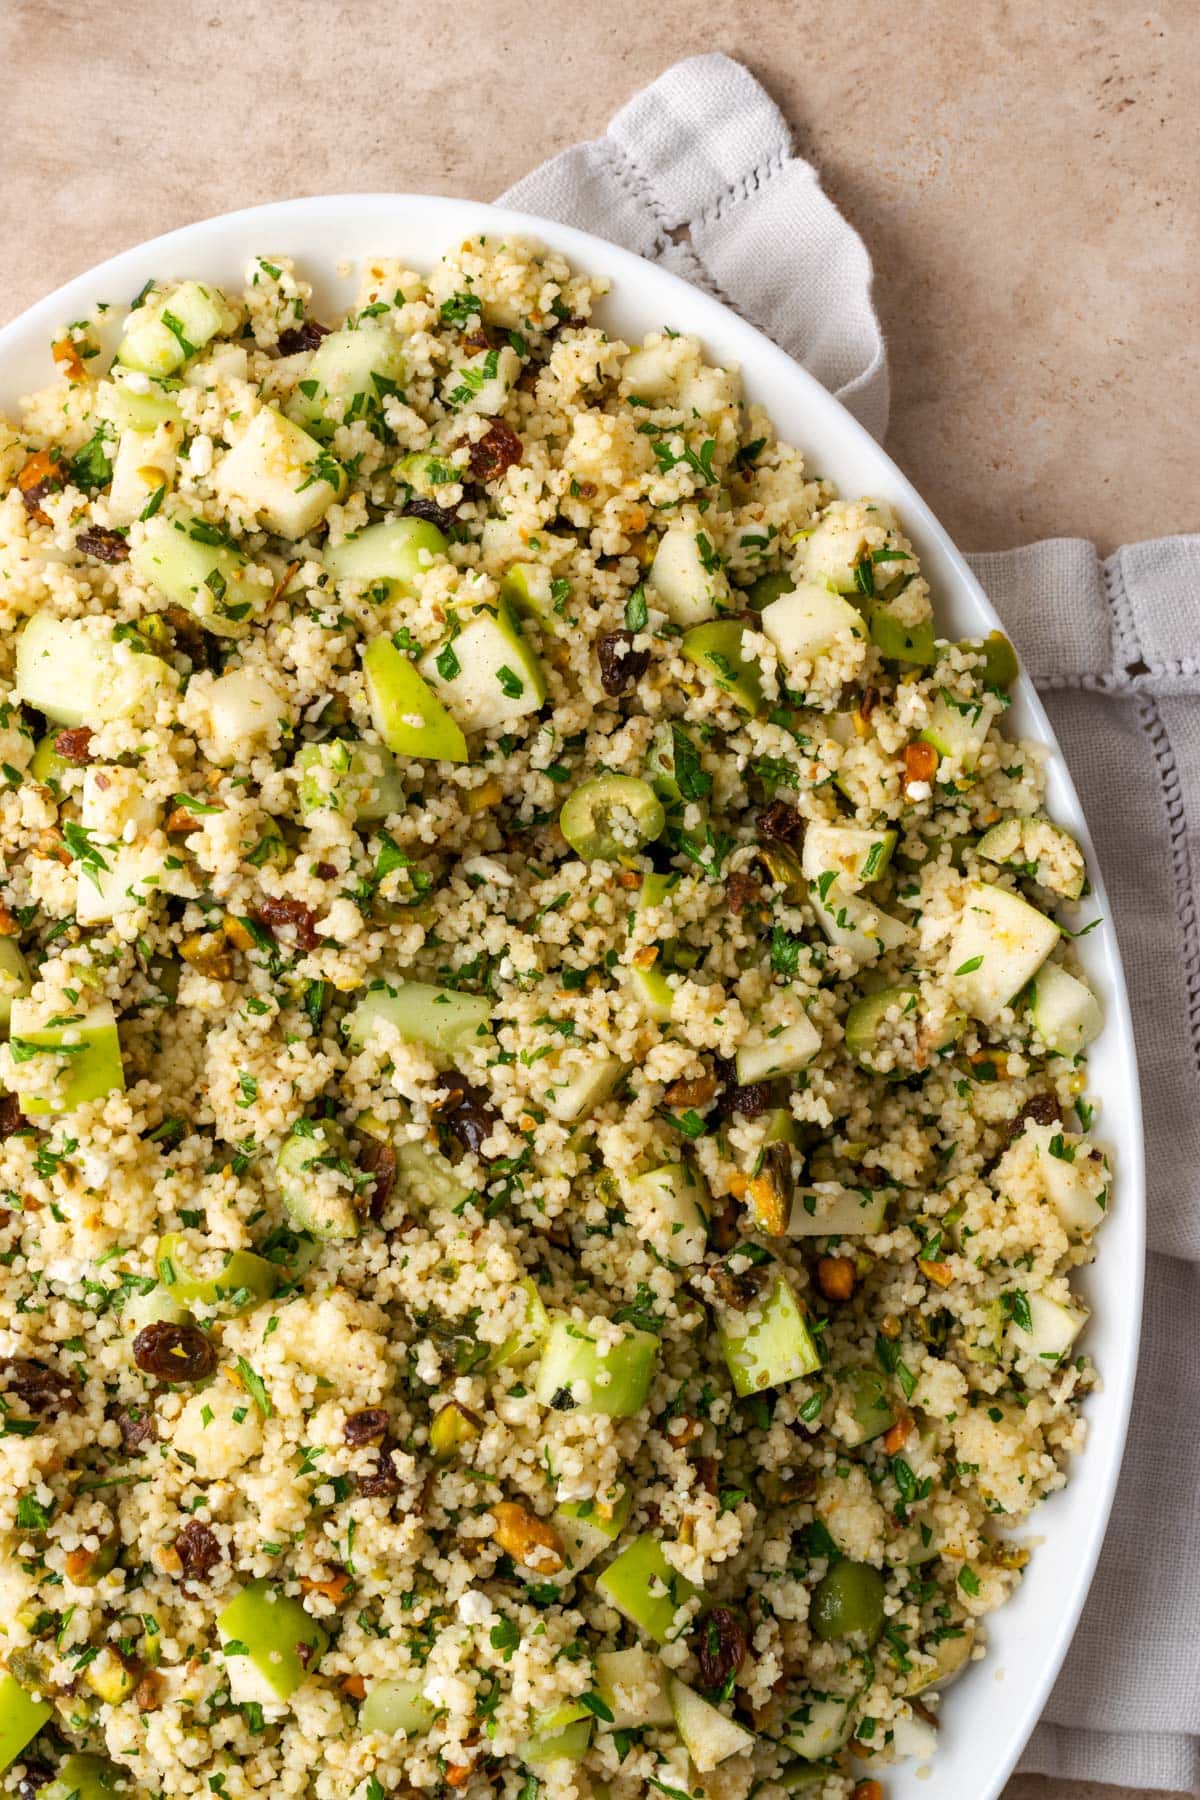 Top view of a large platter of Mediterranean couscous salad.